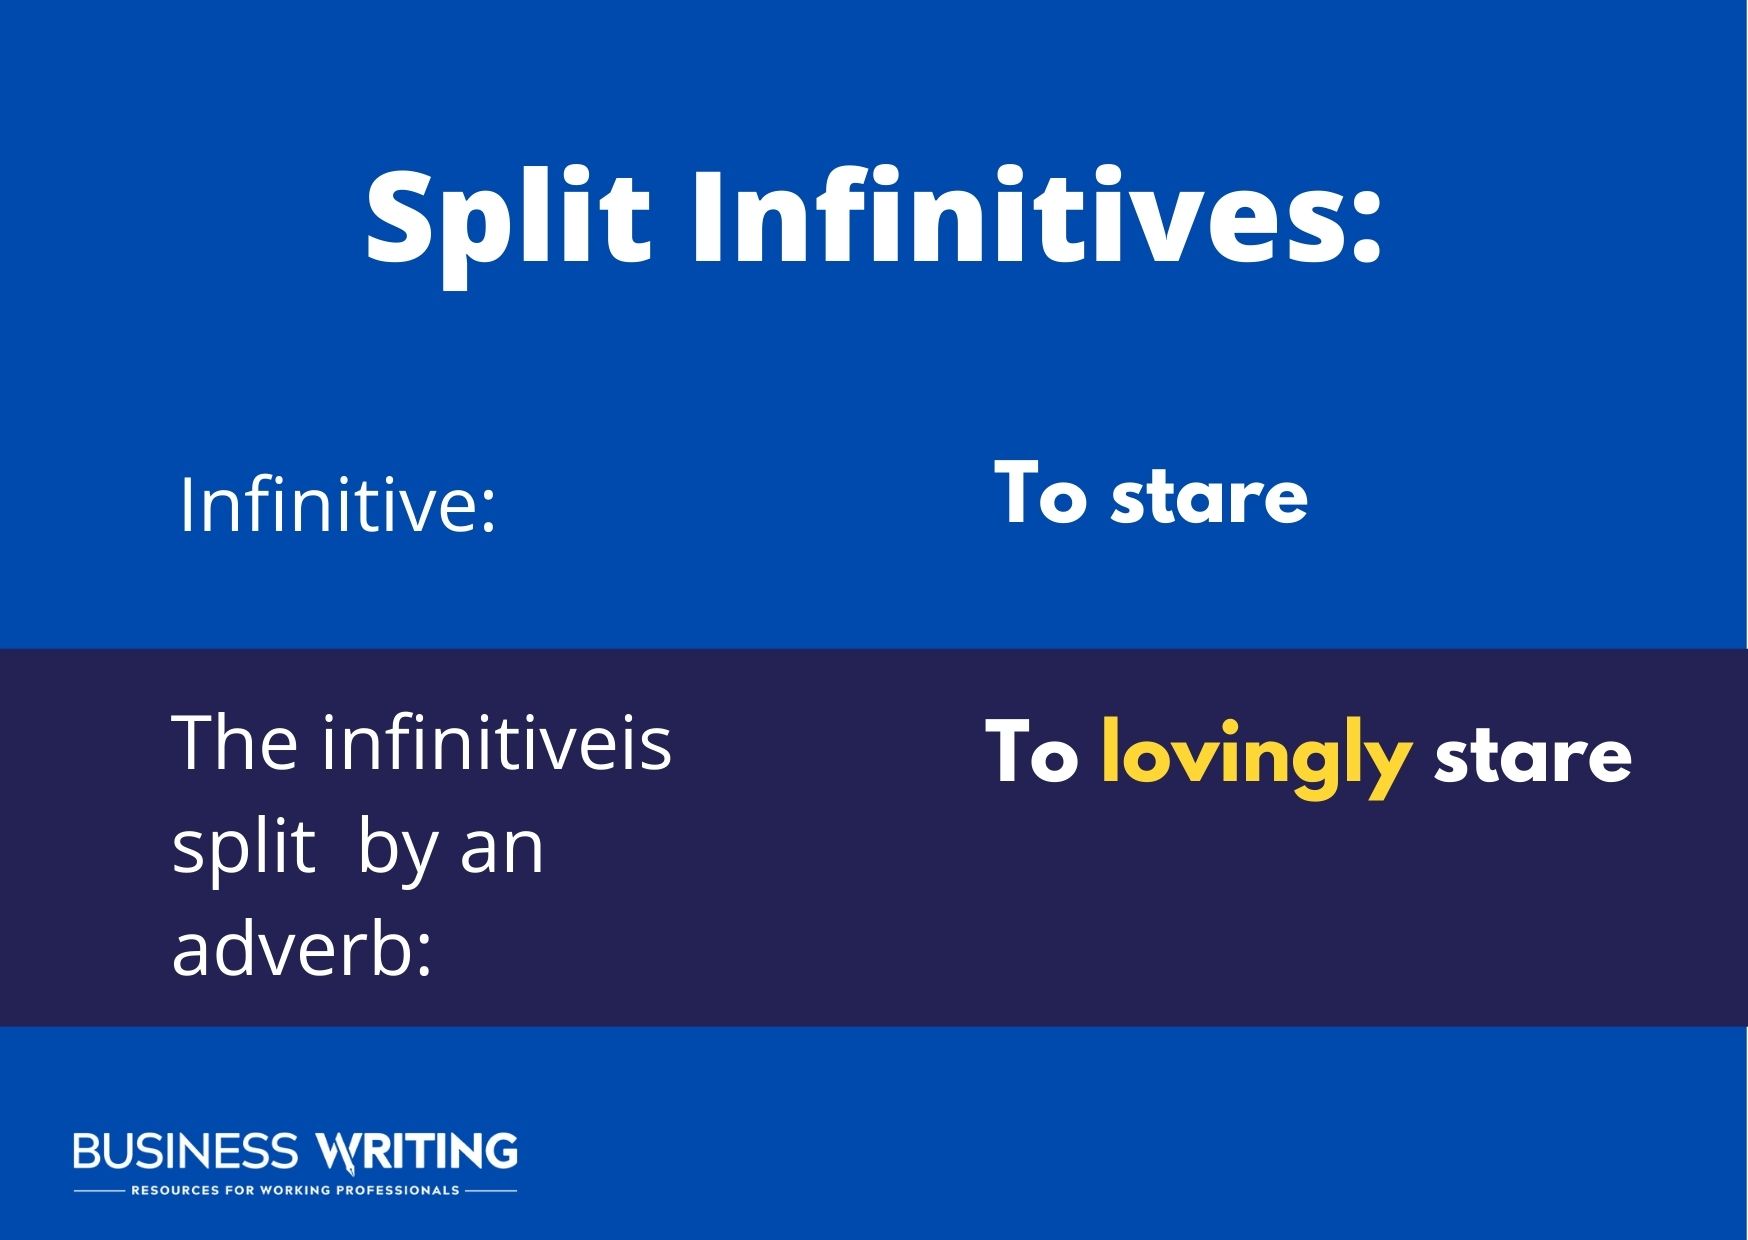 Graphic explaining the Split Infinitive: an infinitive "split" by an adverb: "to lovingly stare"